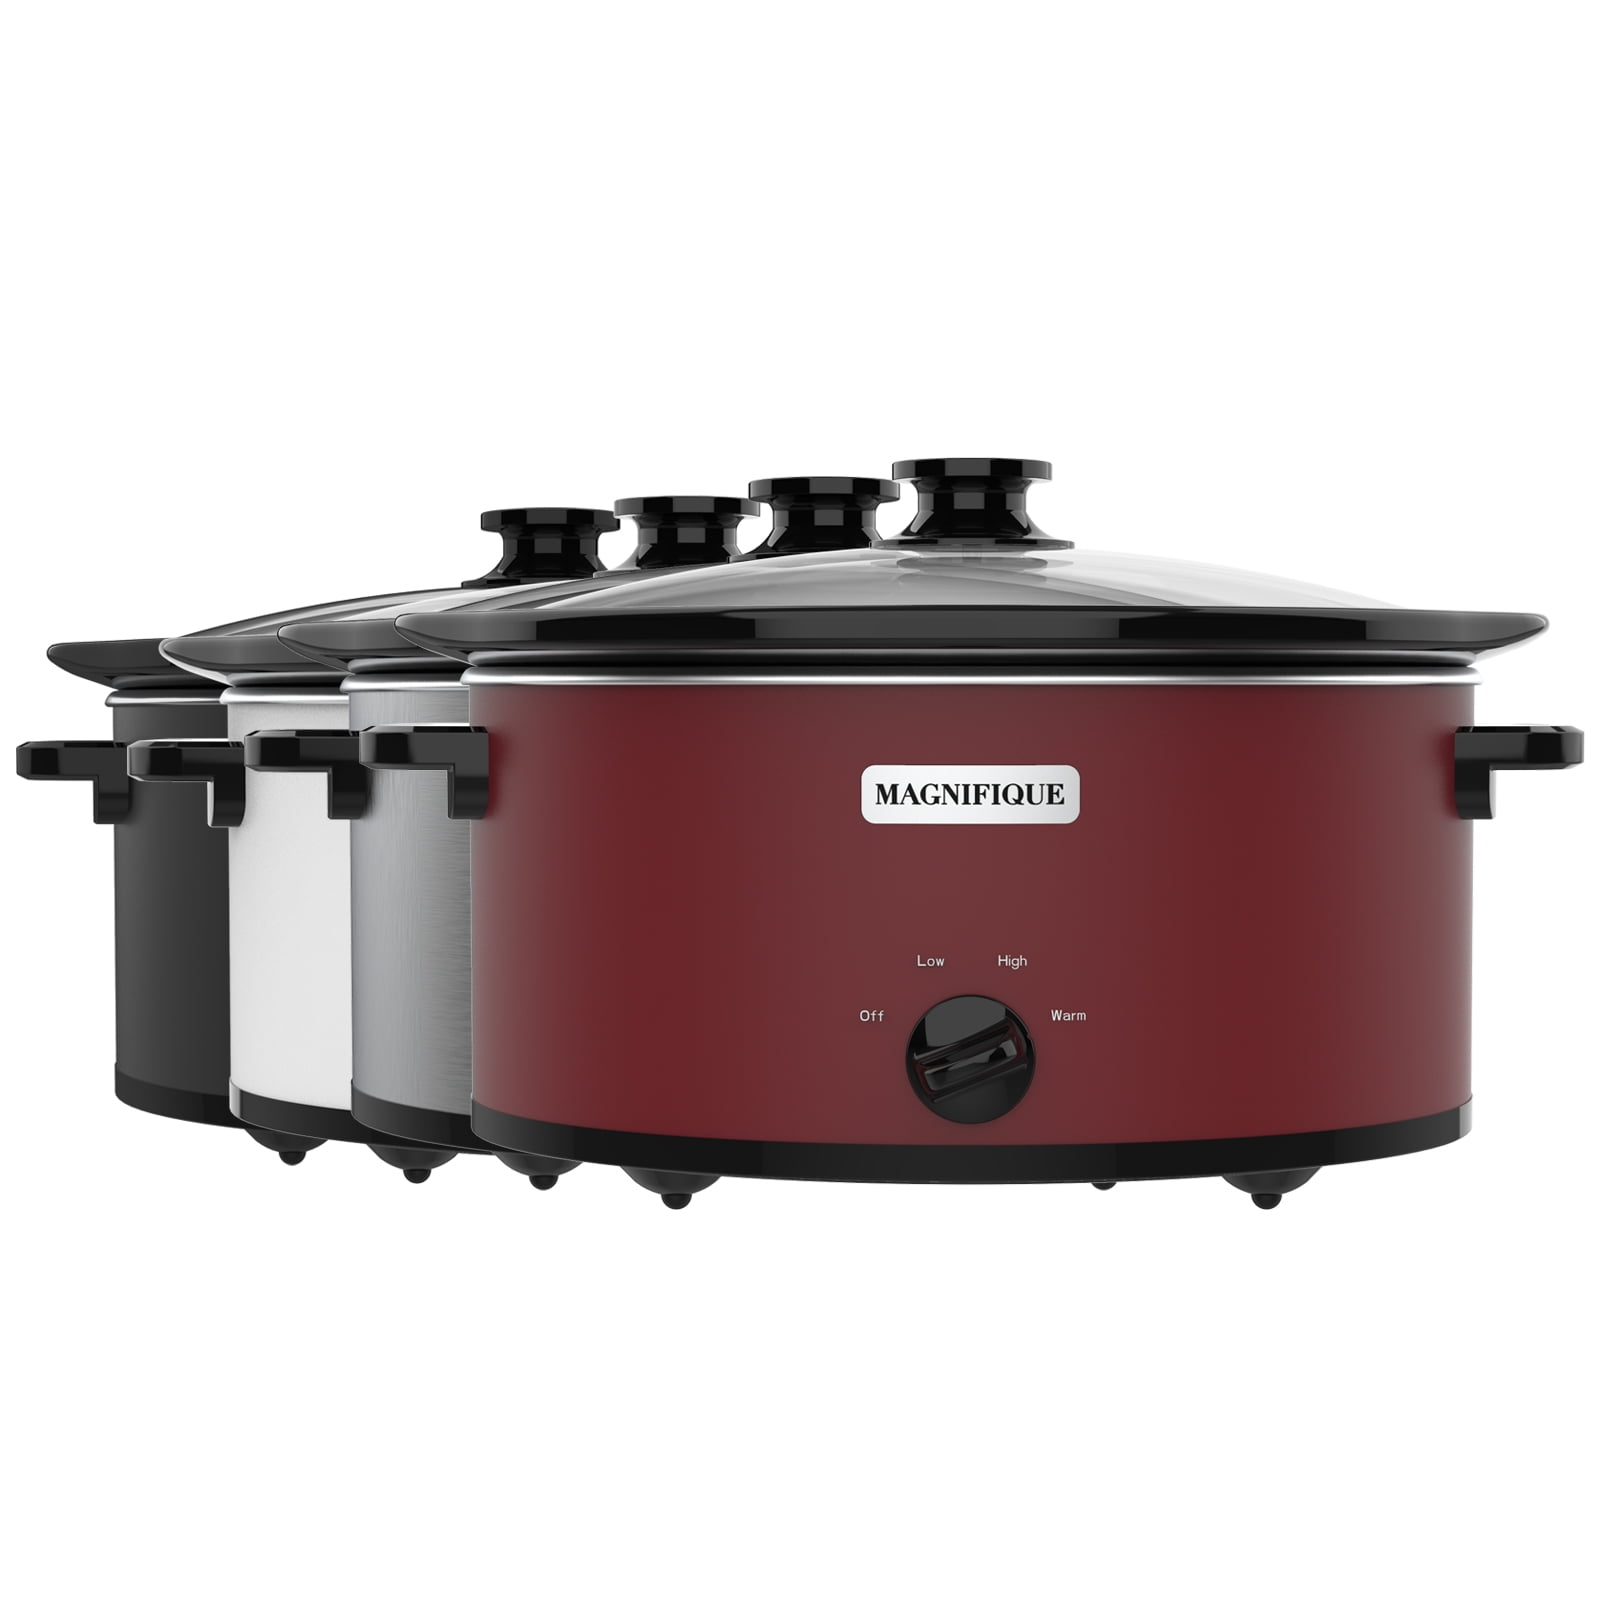 MAGNIFIQUE 4-Quart Slow Cooker with Casserole Manual Warm Setting - Perfect  Kitchen Small Appliance for Family Dinners, Dishwasher Safe Crock, Red